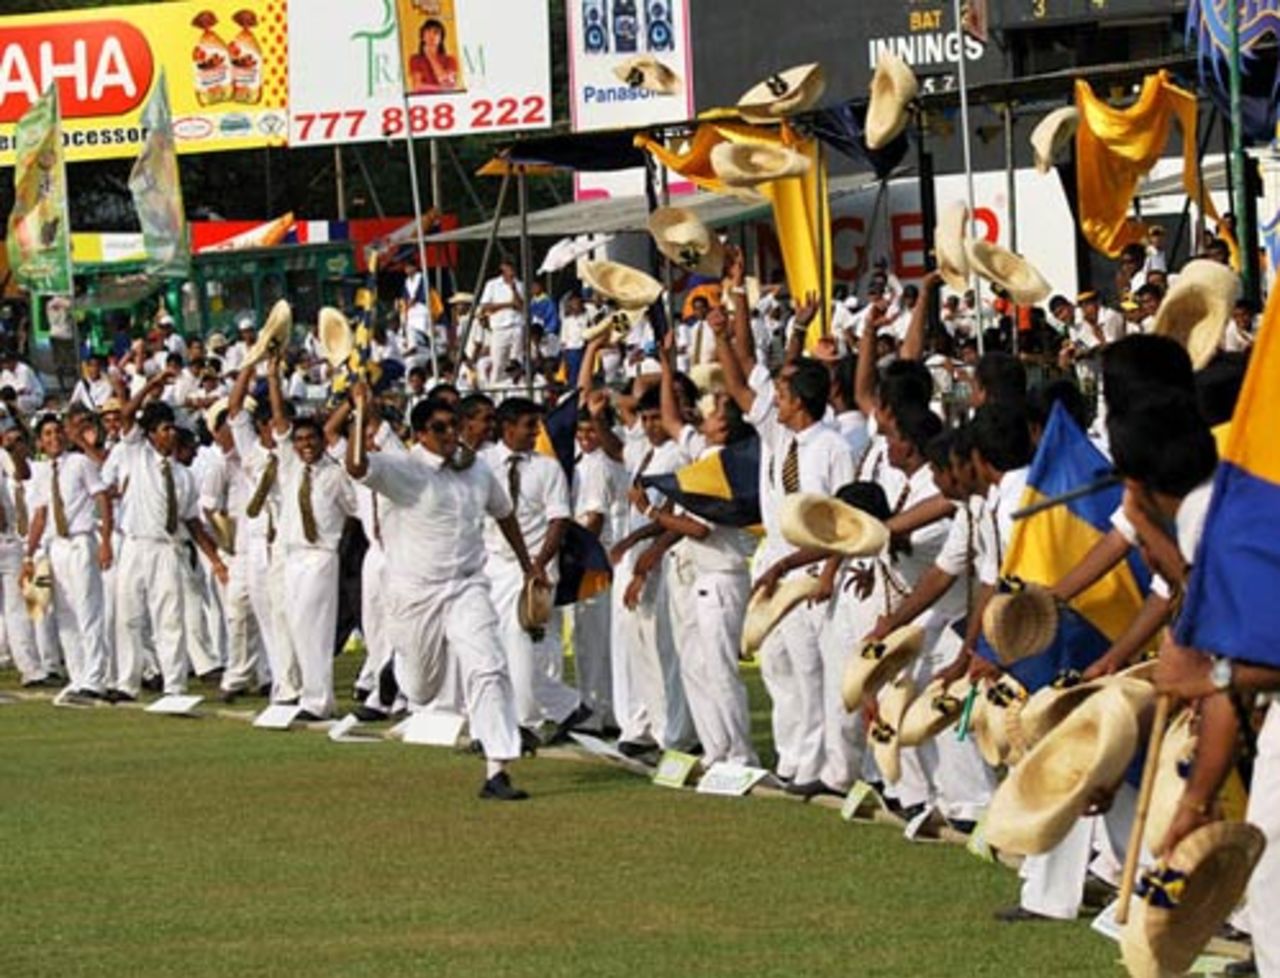 Royals school boys in the crowd, Royal College v St. Thomas College, SSC, Colombo, March 11-13, 2010